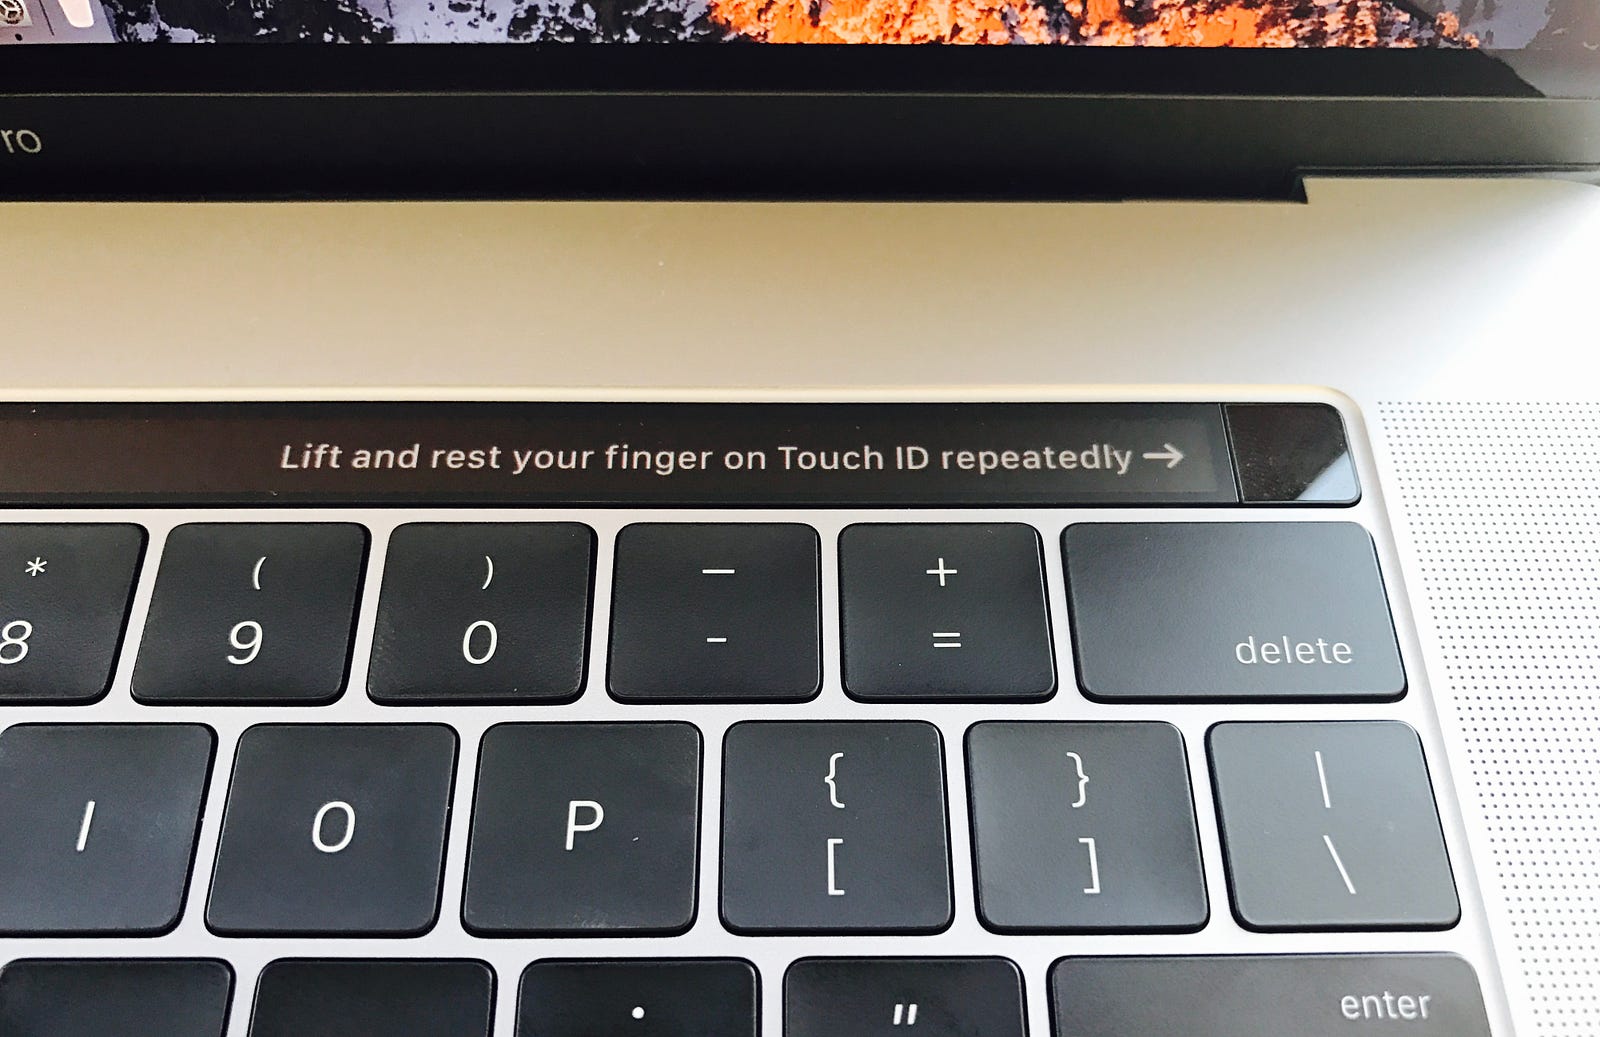 Macbook Pro with Touch Bar Review! Worth it? 